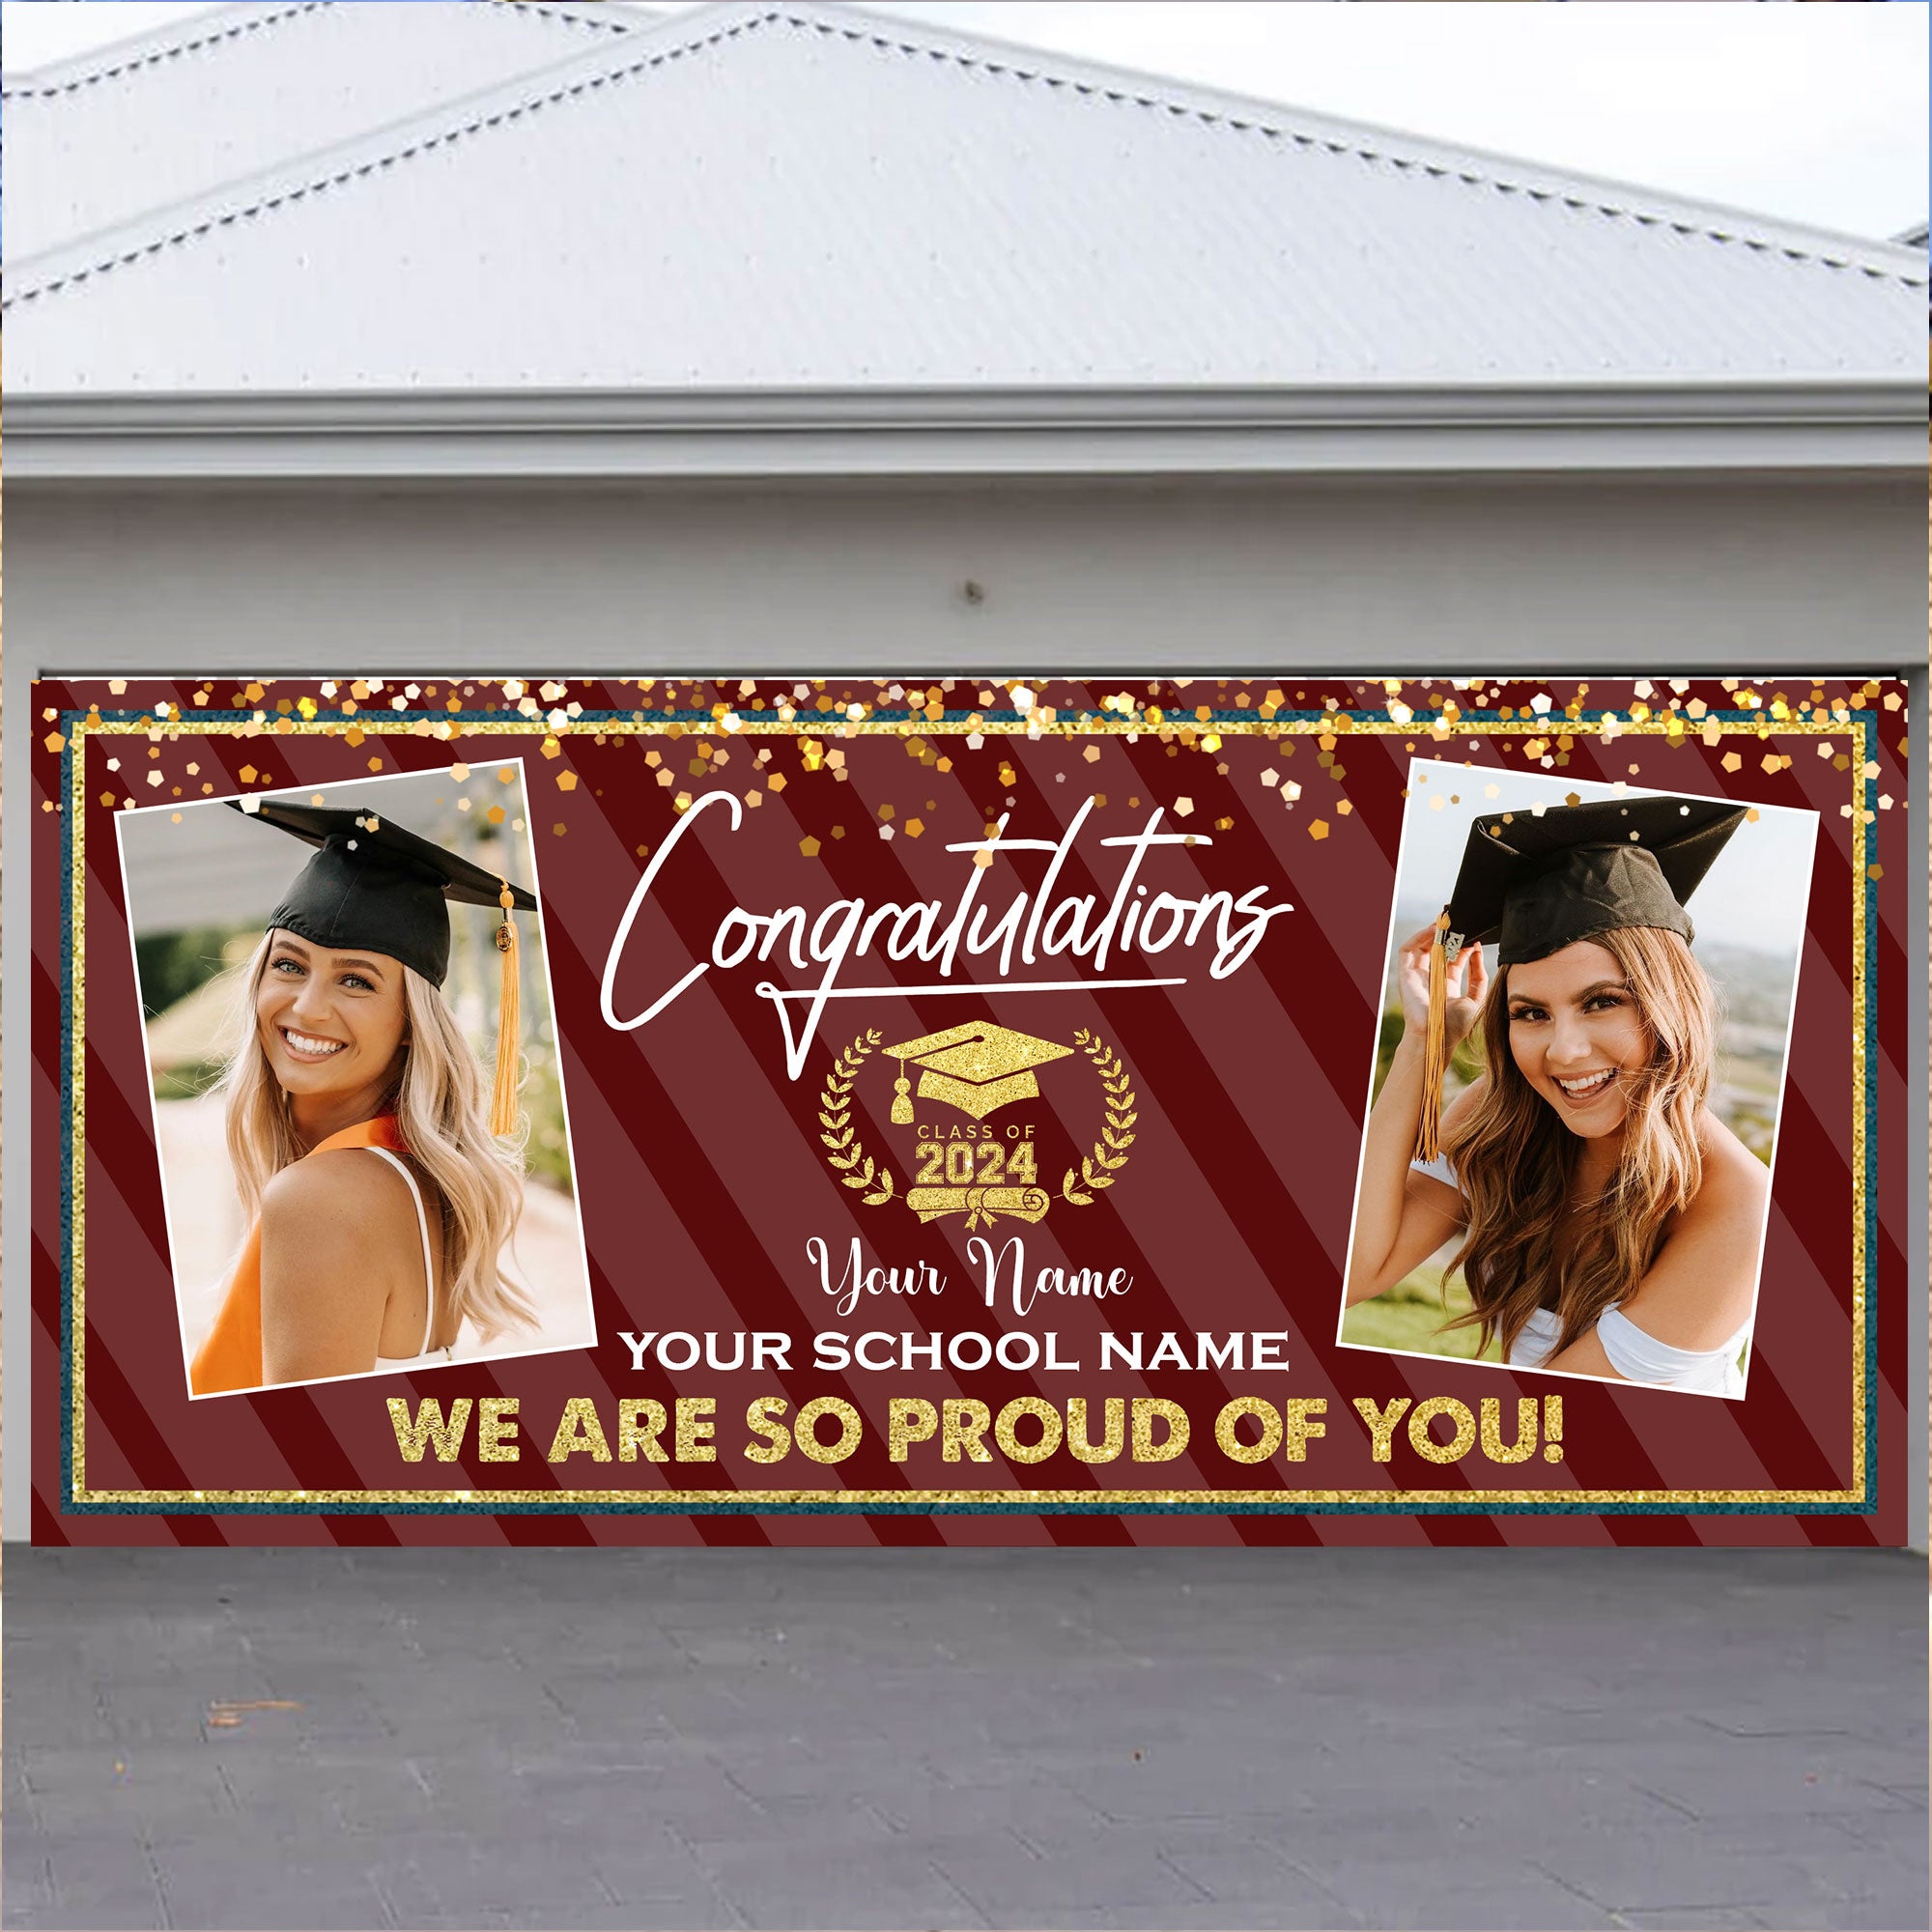 Congratulation Class Of 2024 We Are So Proud Of You - Personalized Photo And Name, Single Garage, Garage Door Banner Covers - Garage Door Banner Decorations